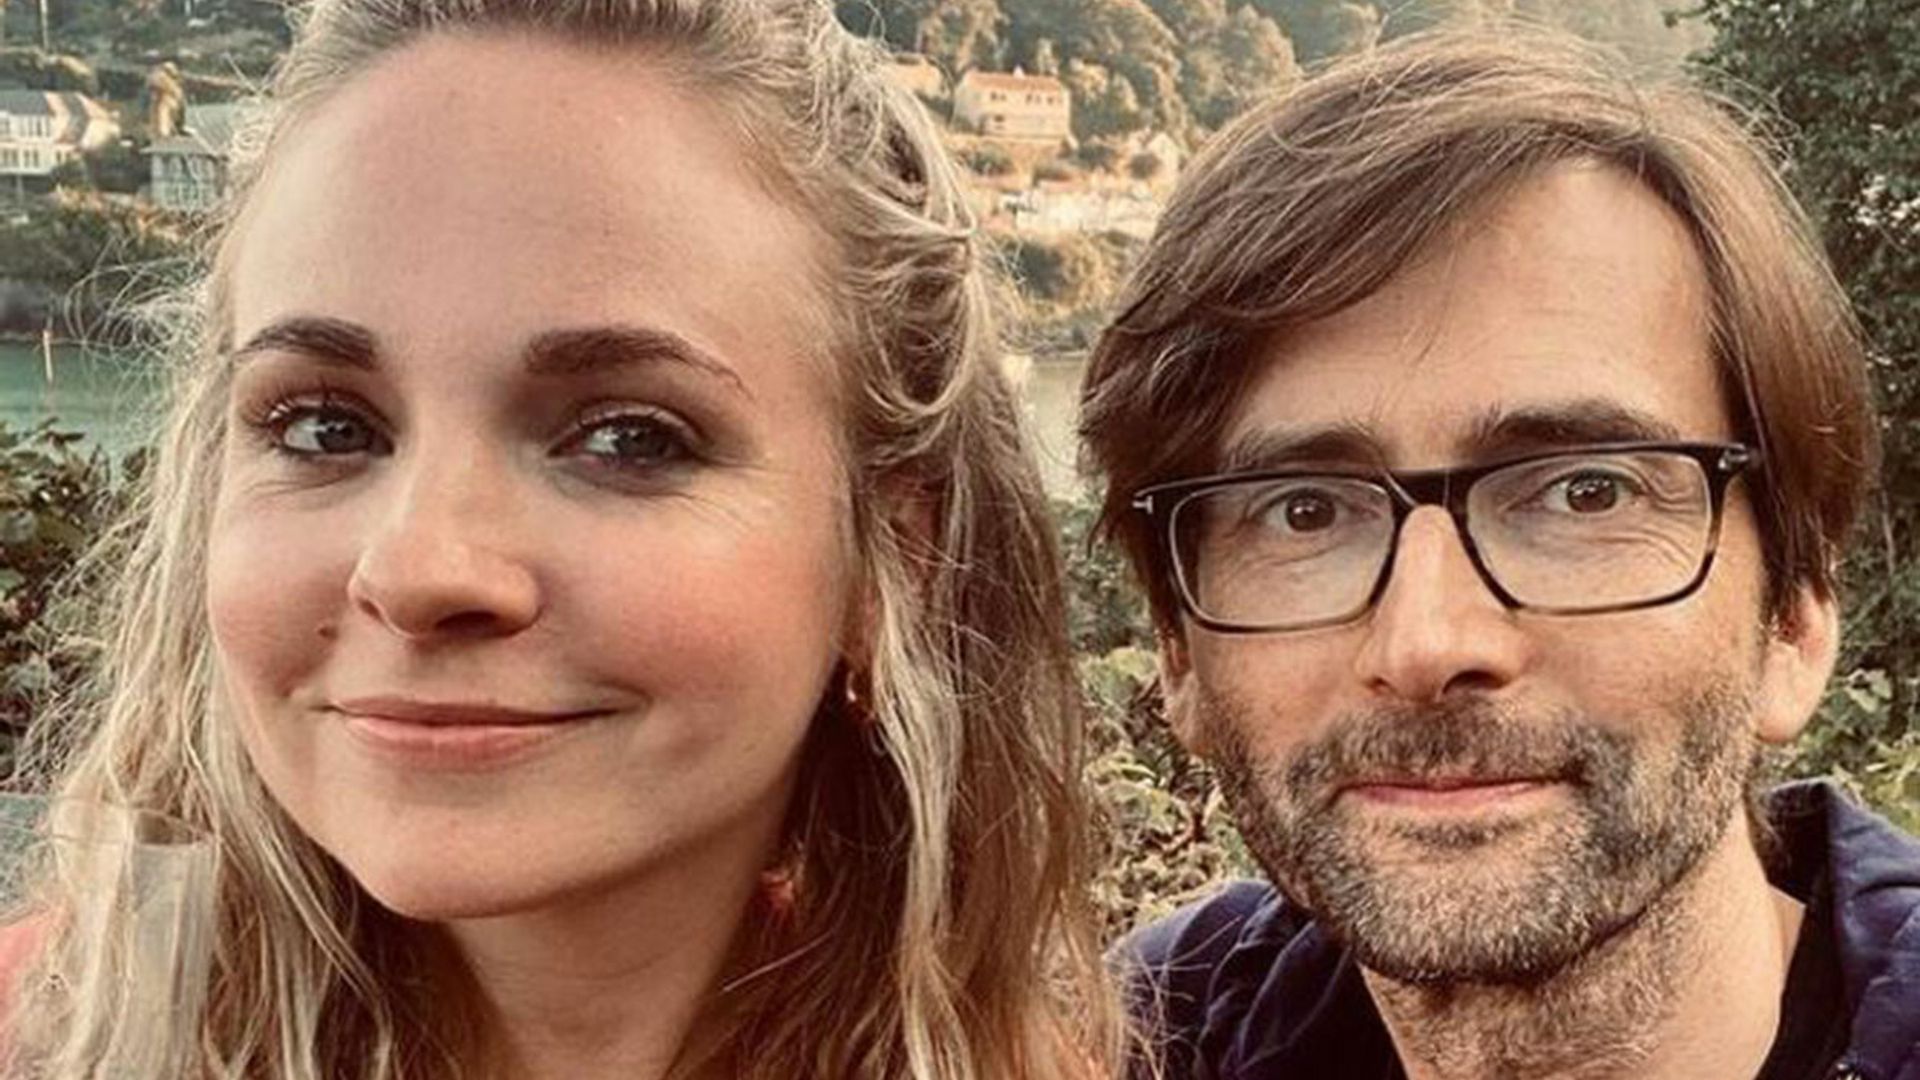 David Tennant's wife Georgia sparks reaction with emotional family photo